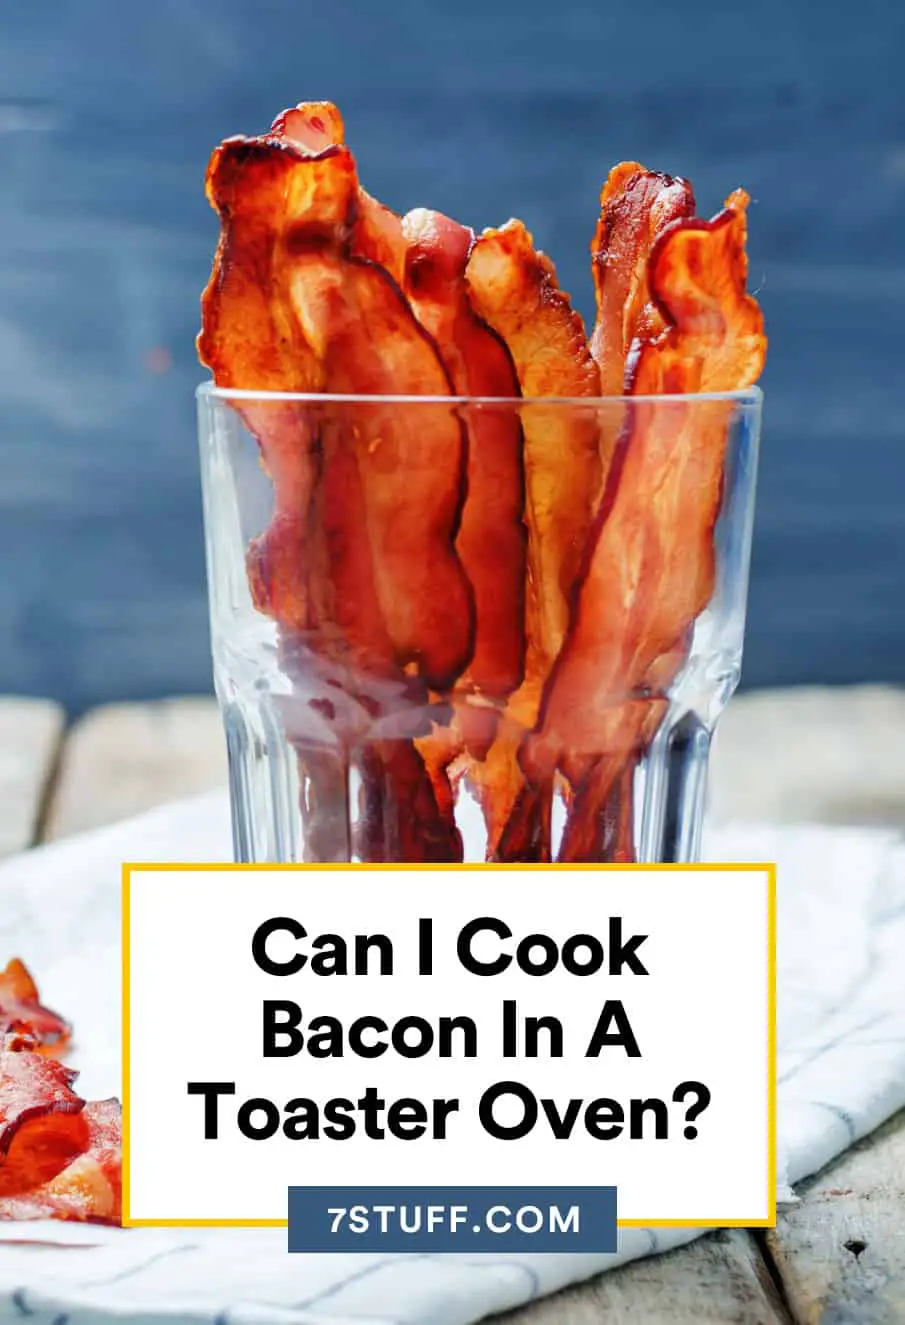 Can I Cook Bacon In A Toaster Oven?